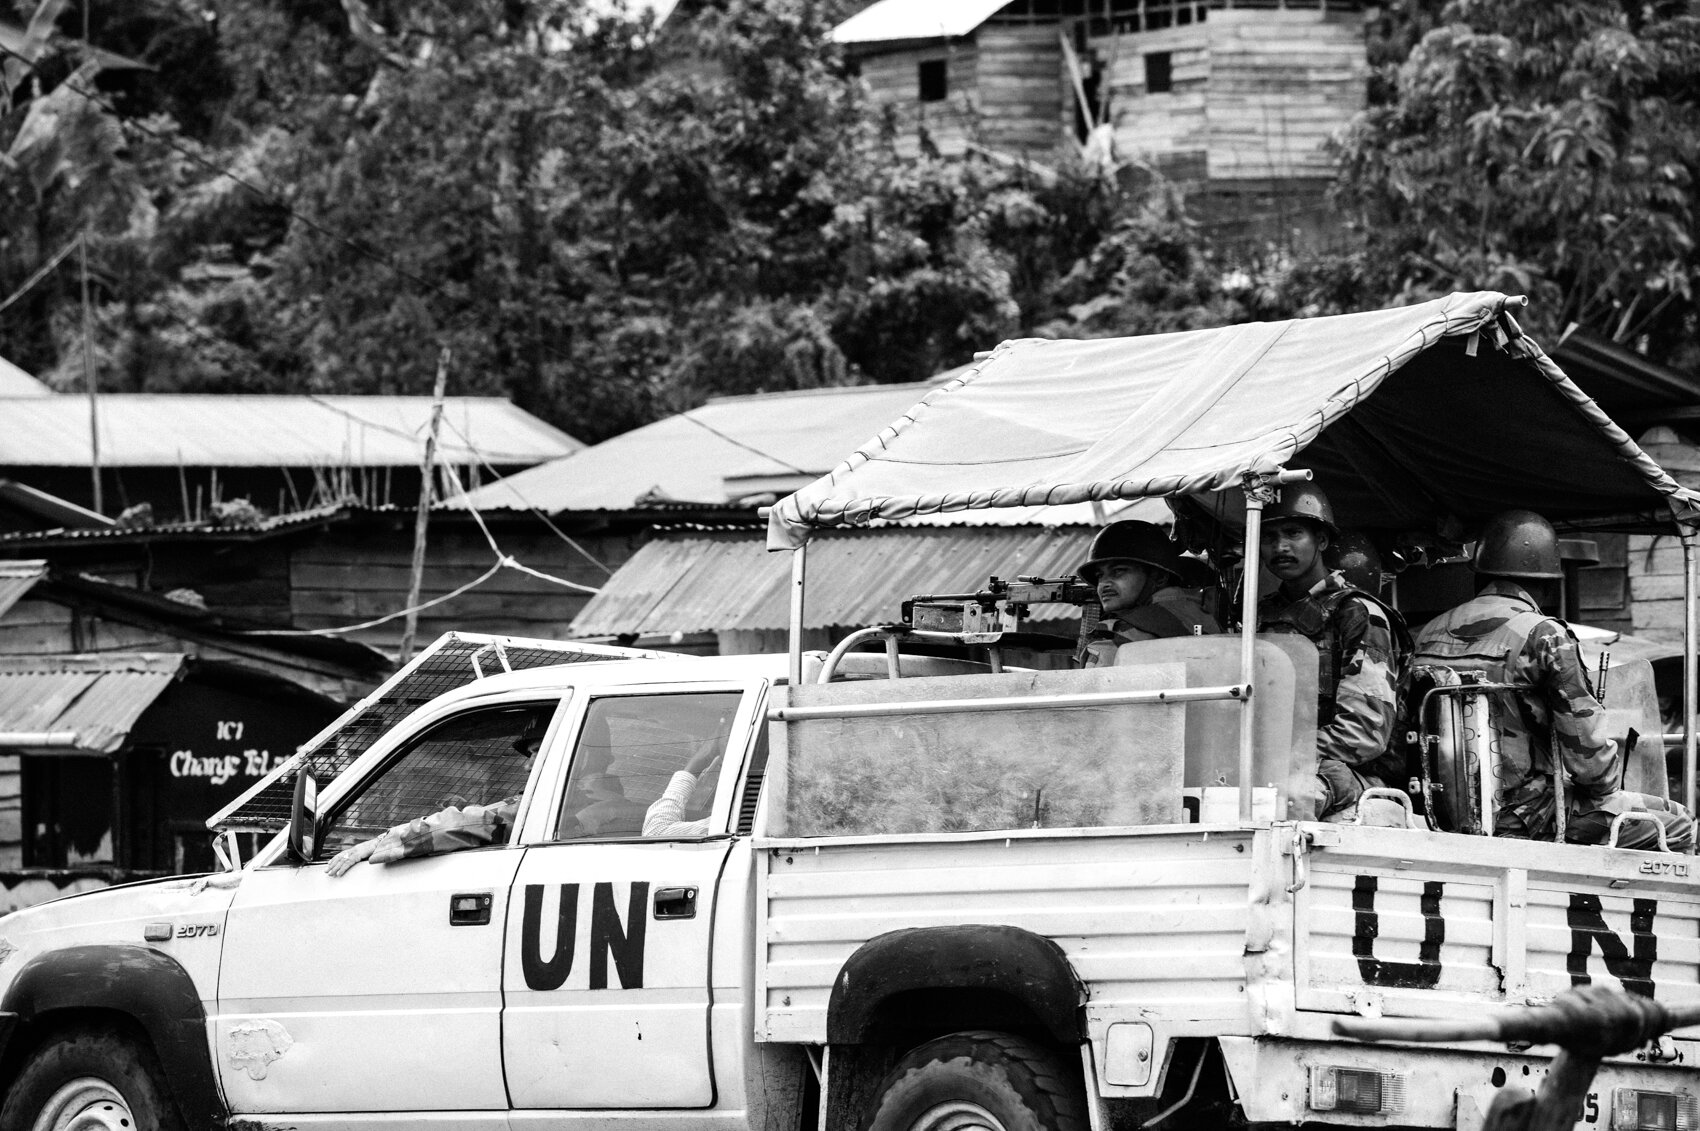  A UN troop Keshero just outside Goma, a pivotal town in eastern DRC that was captured by M23 rebels. 